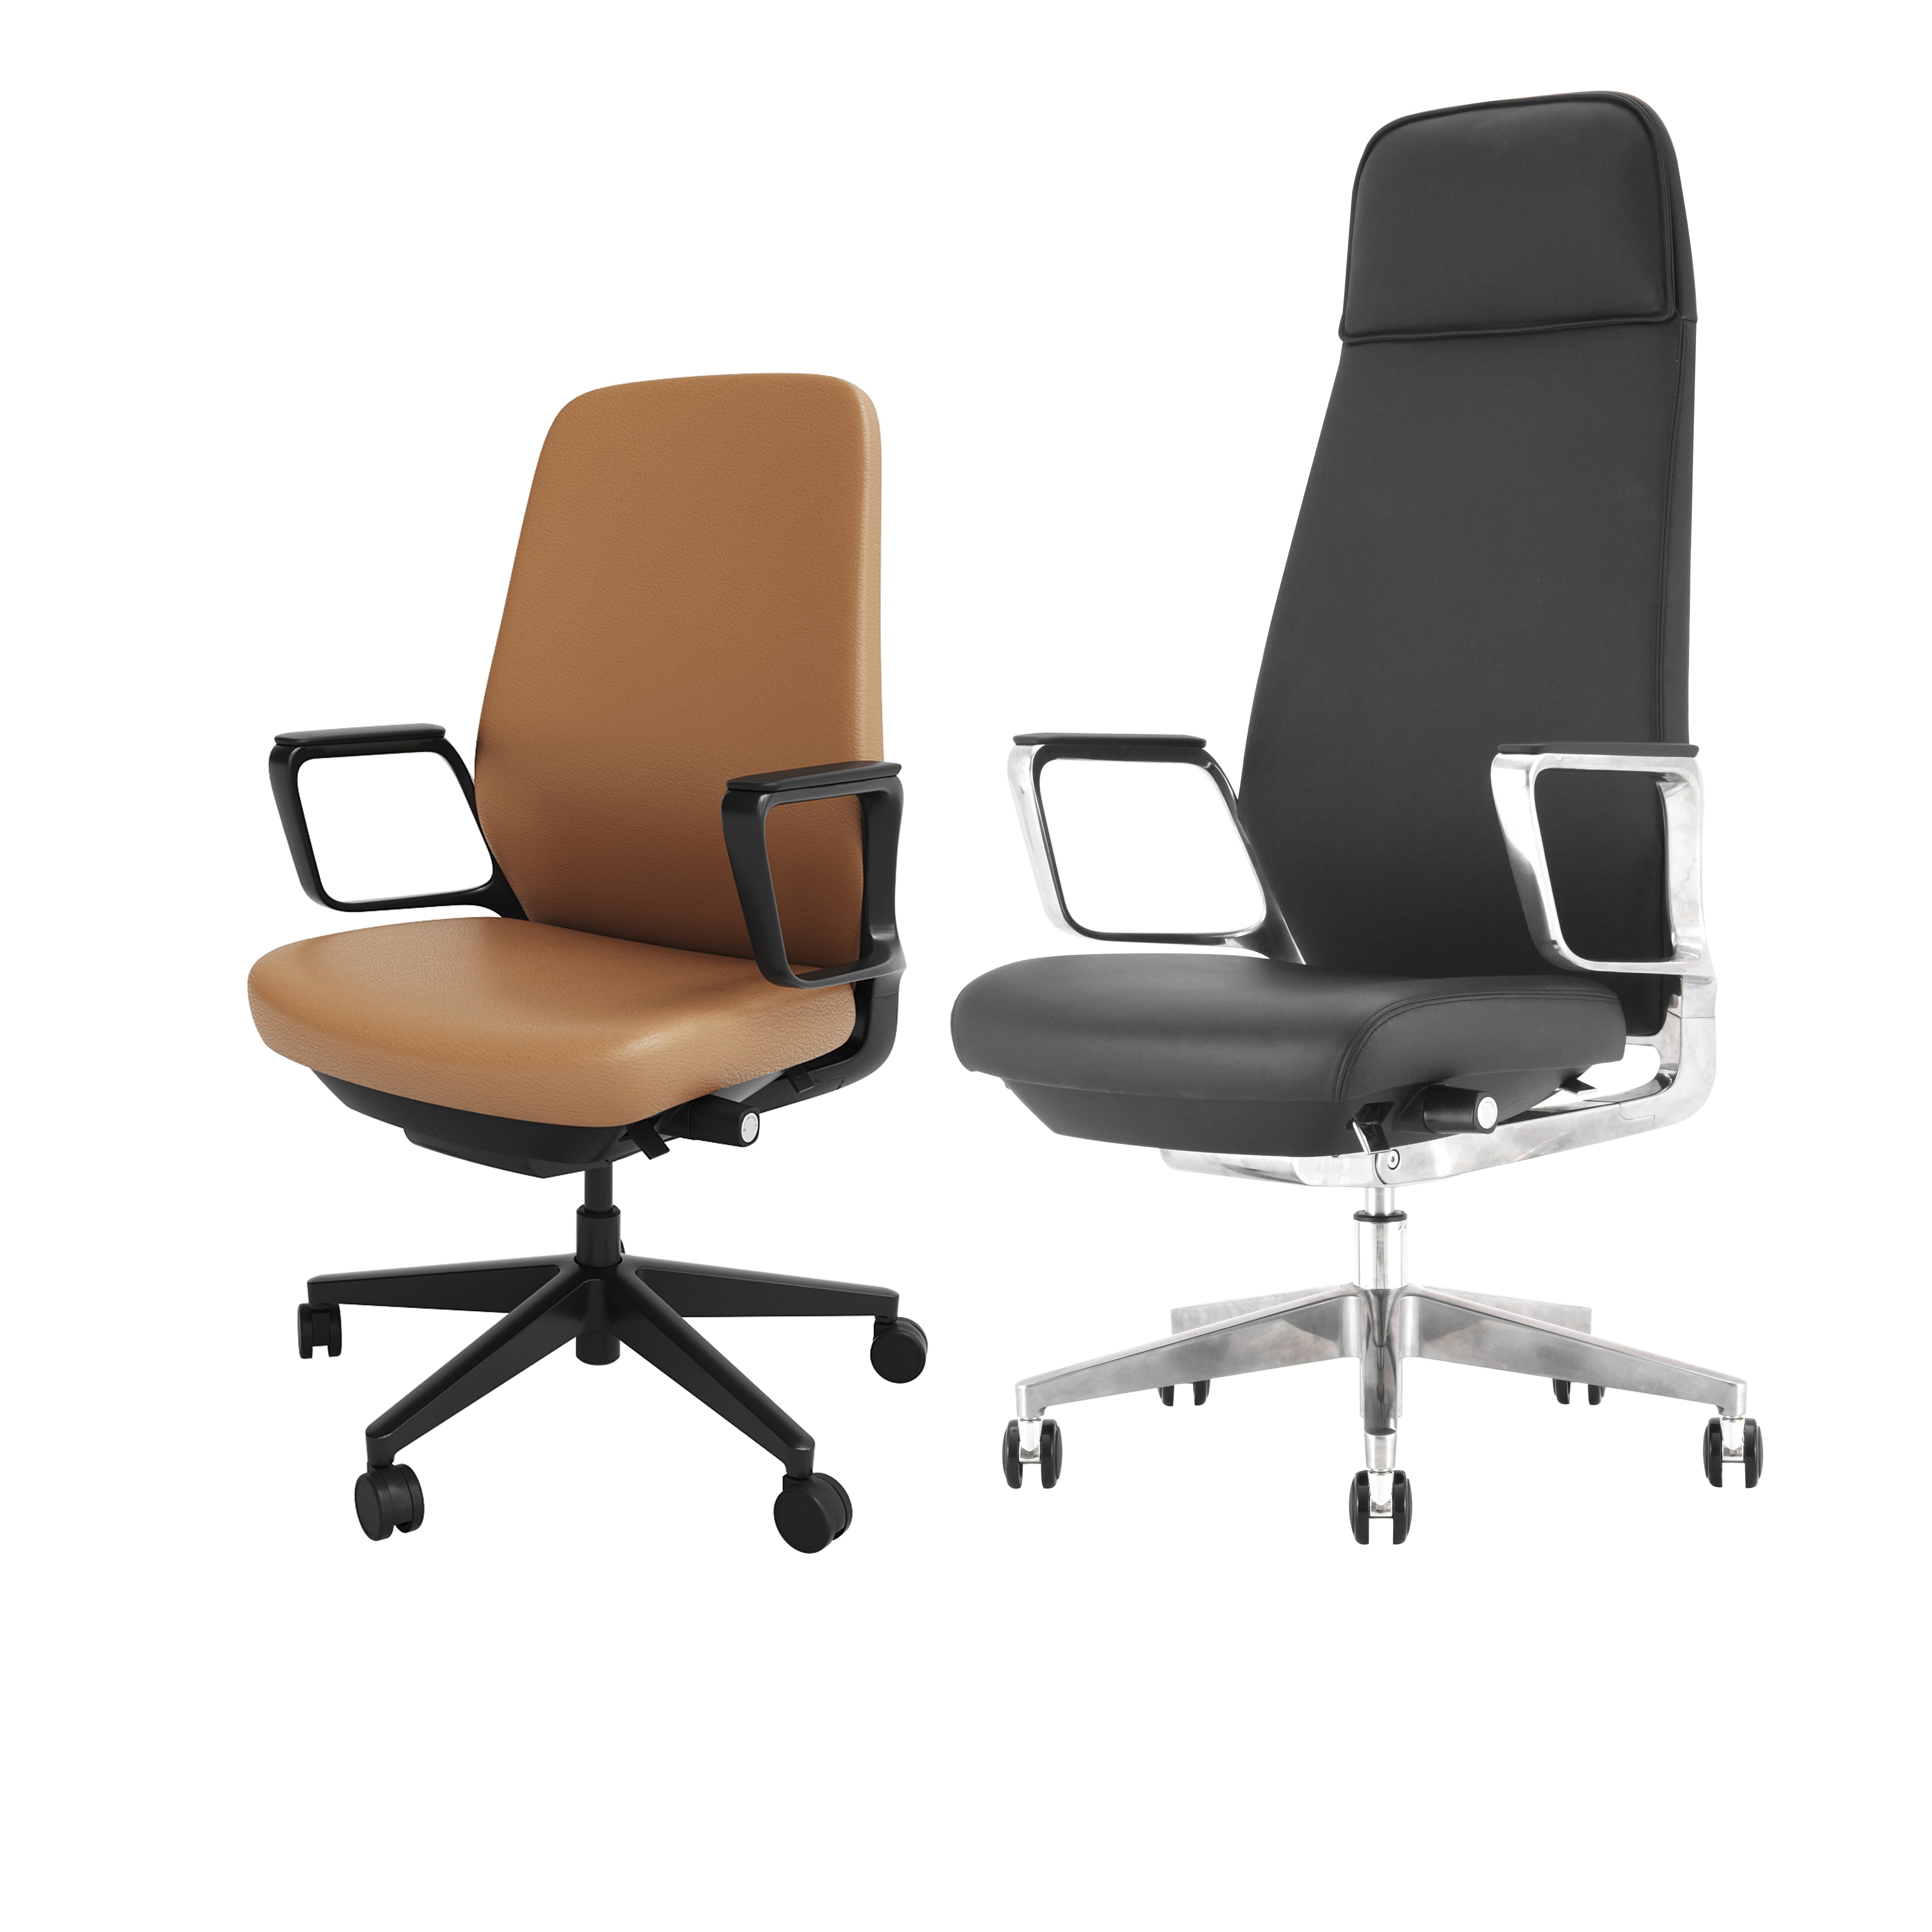 Suede - Office Chair (Genuine Leather)